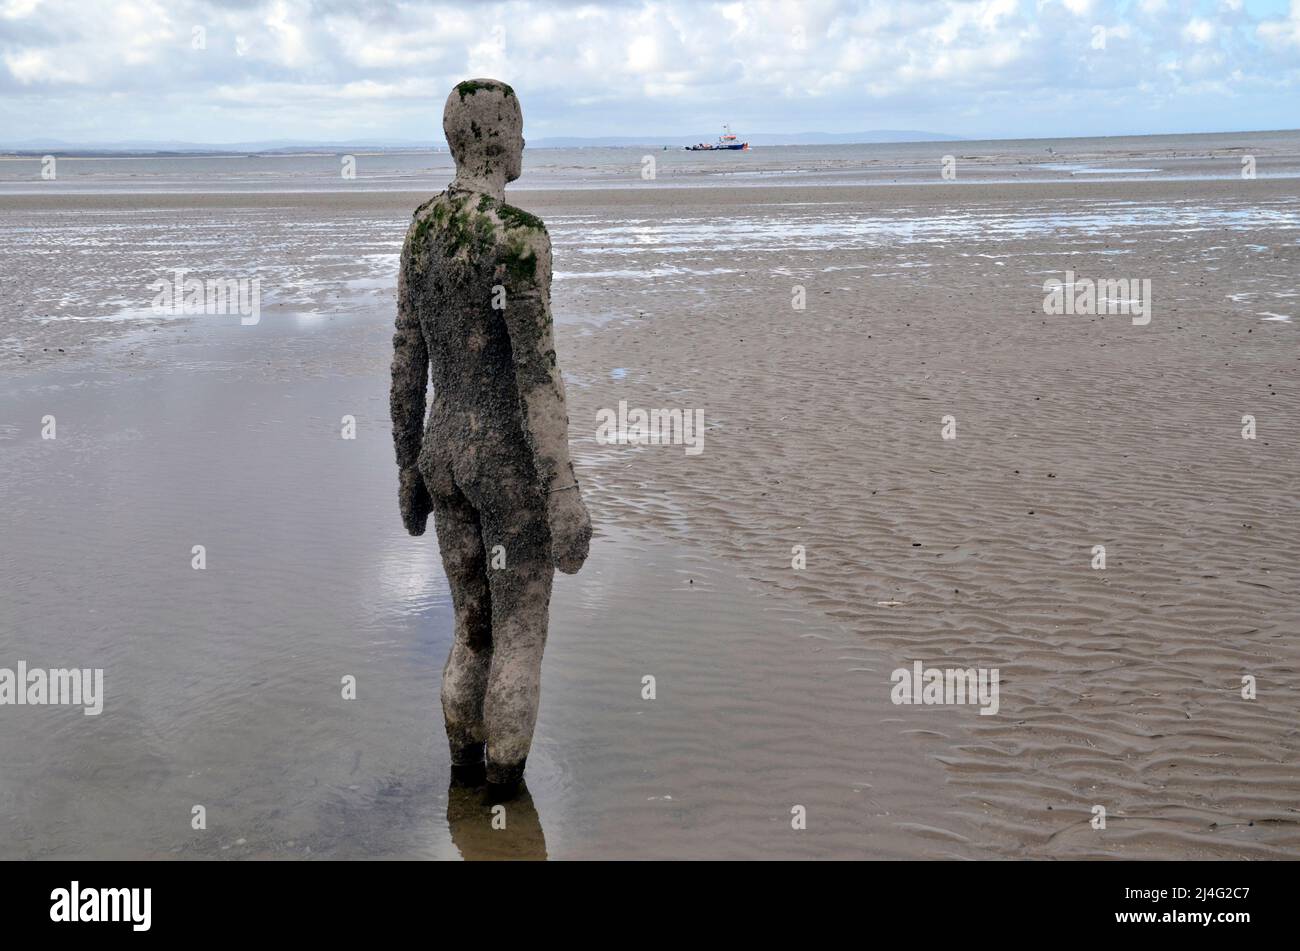 Statues on Crosby Beach in Merseyside, part of the Another Place installation by sculptor and artist Antony Gormley Stock Photo